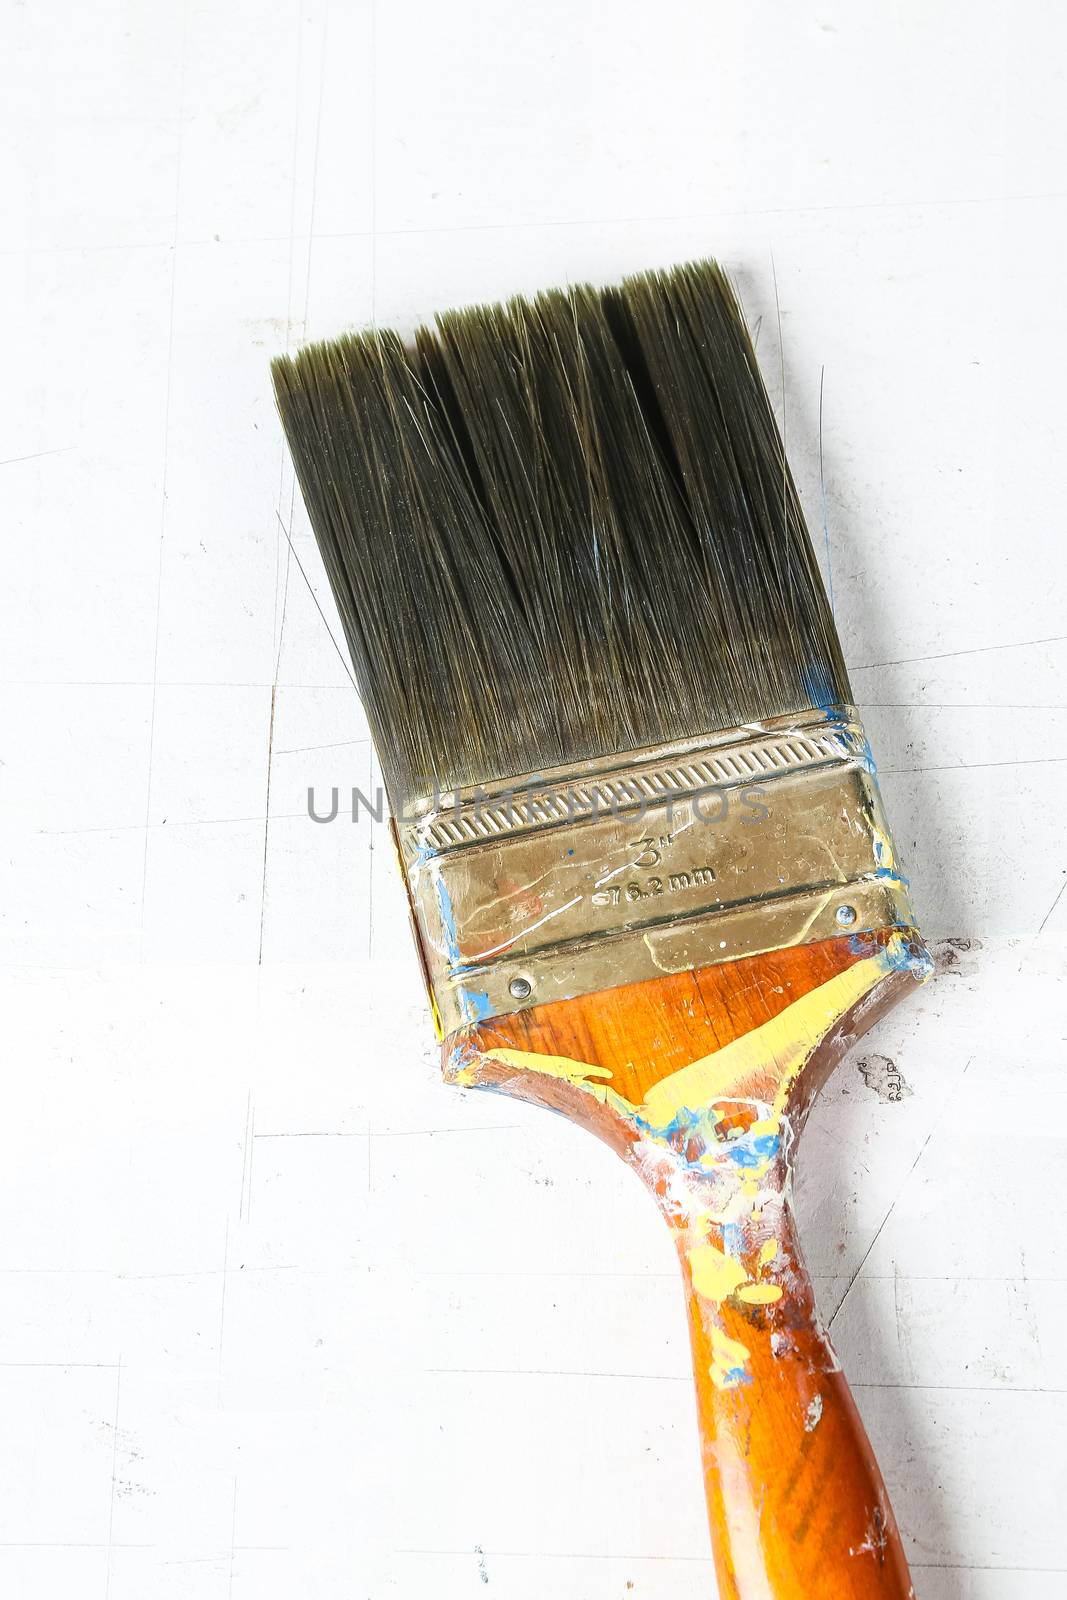 Close up of old paint brushes, grunge and rusty texture background